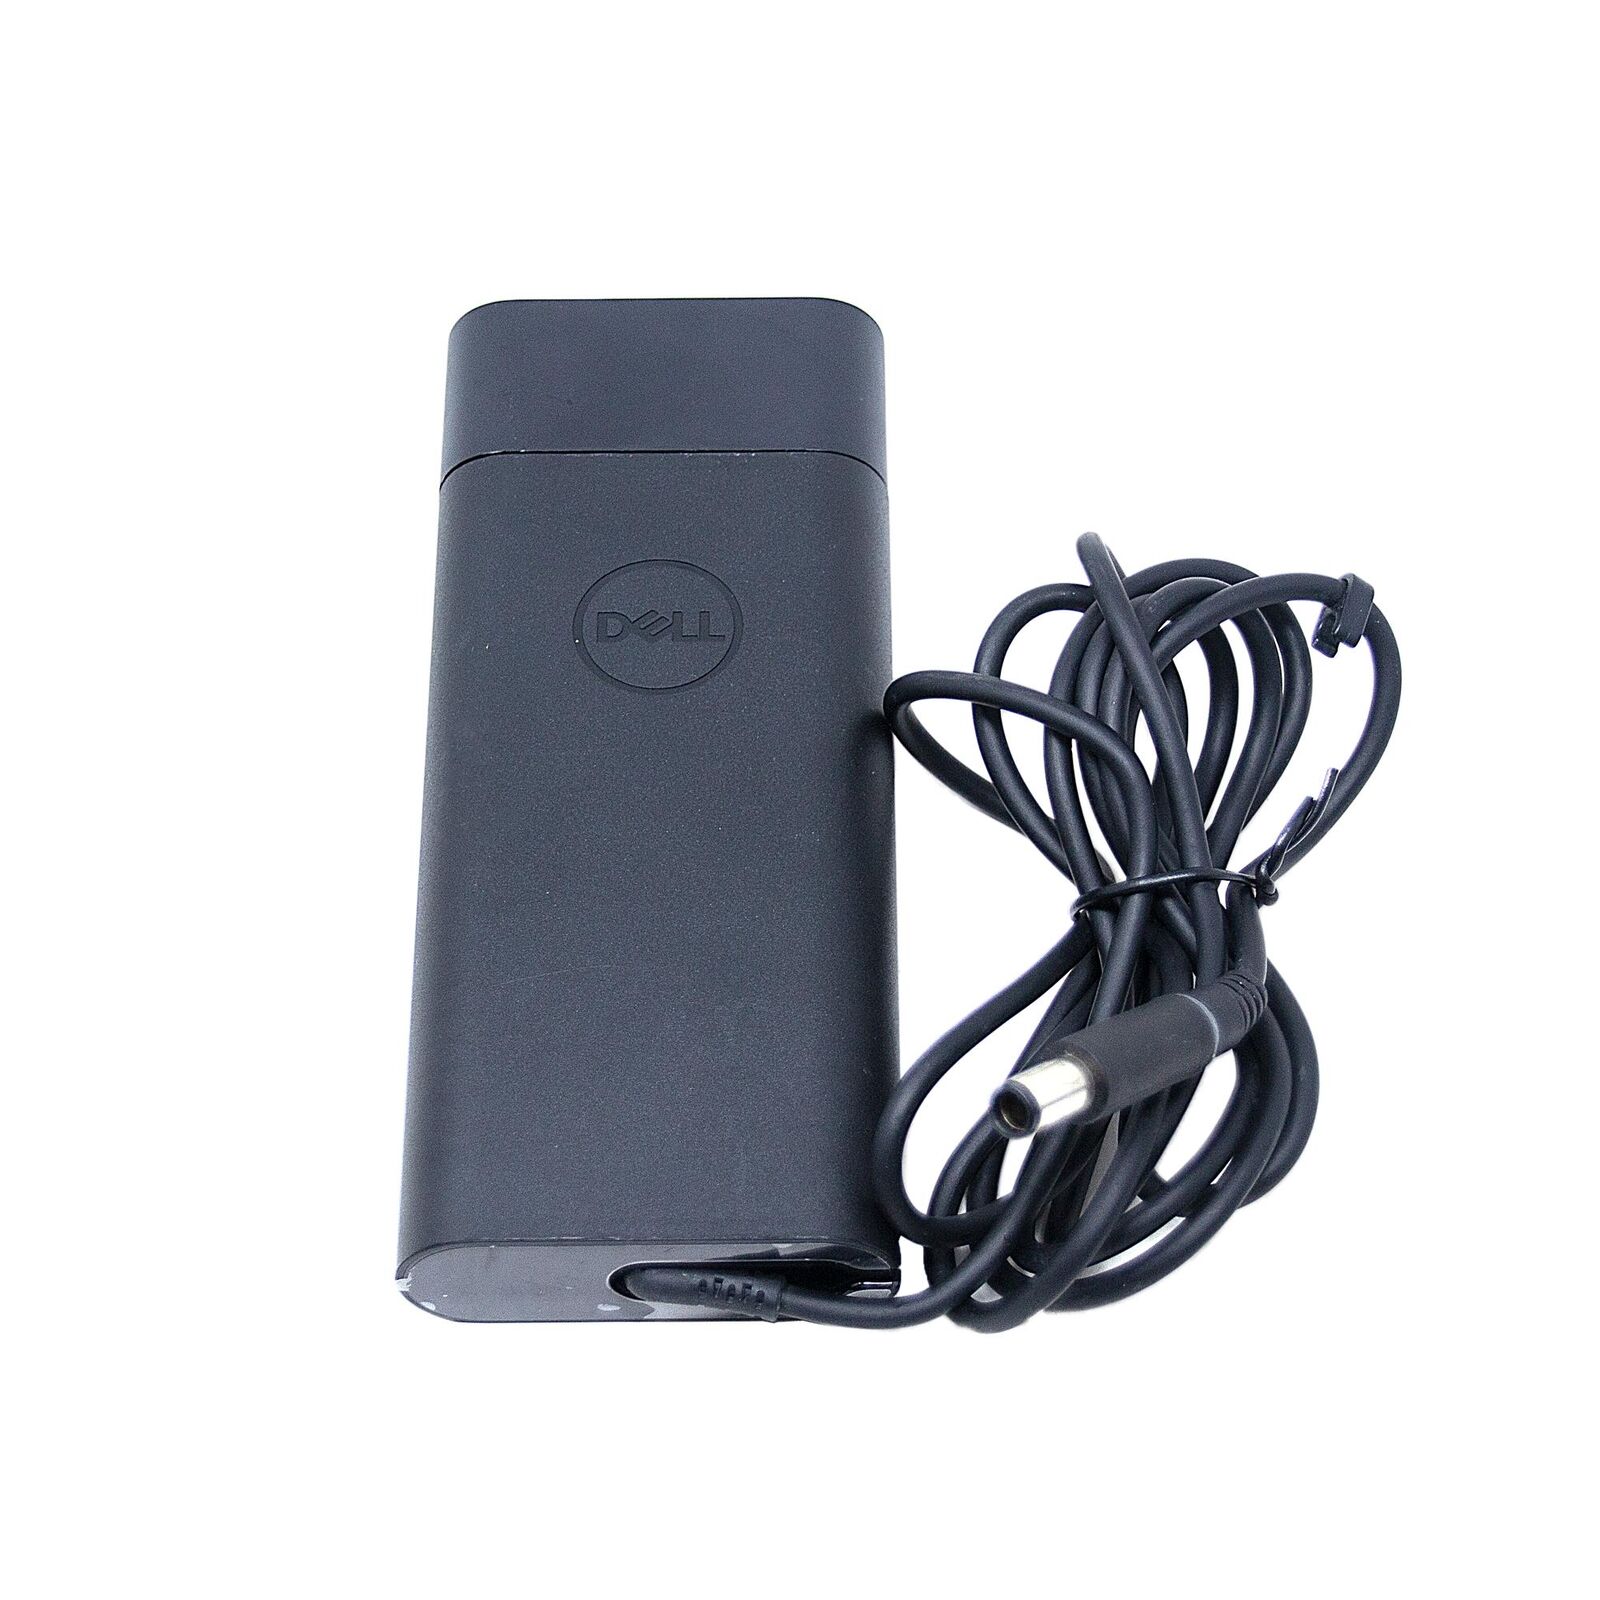 DELL Studio 1735 PP31L Genuine Original AC Power Adapter Charger